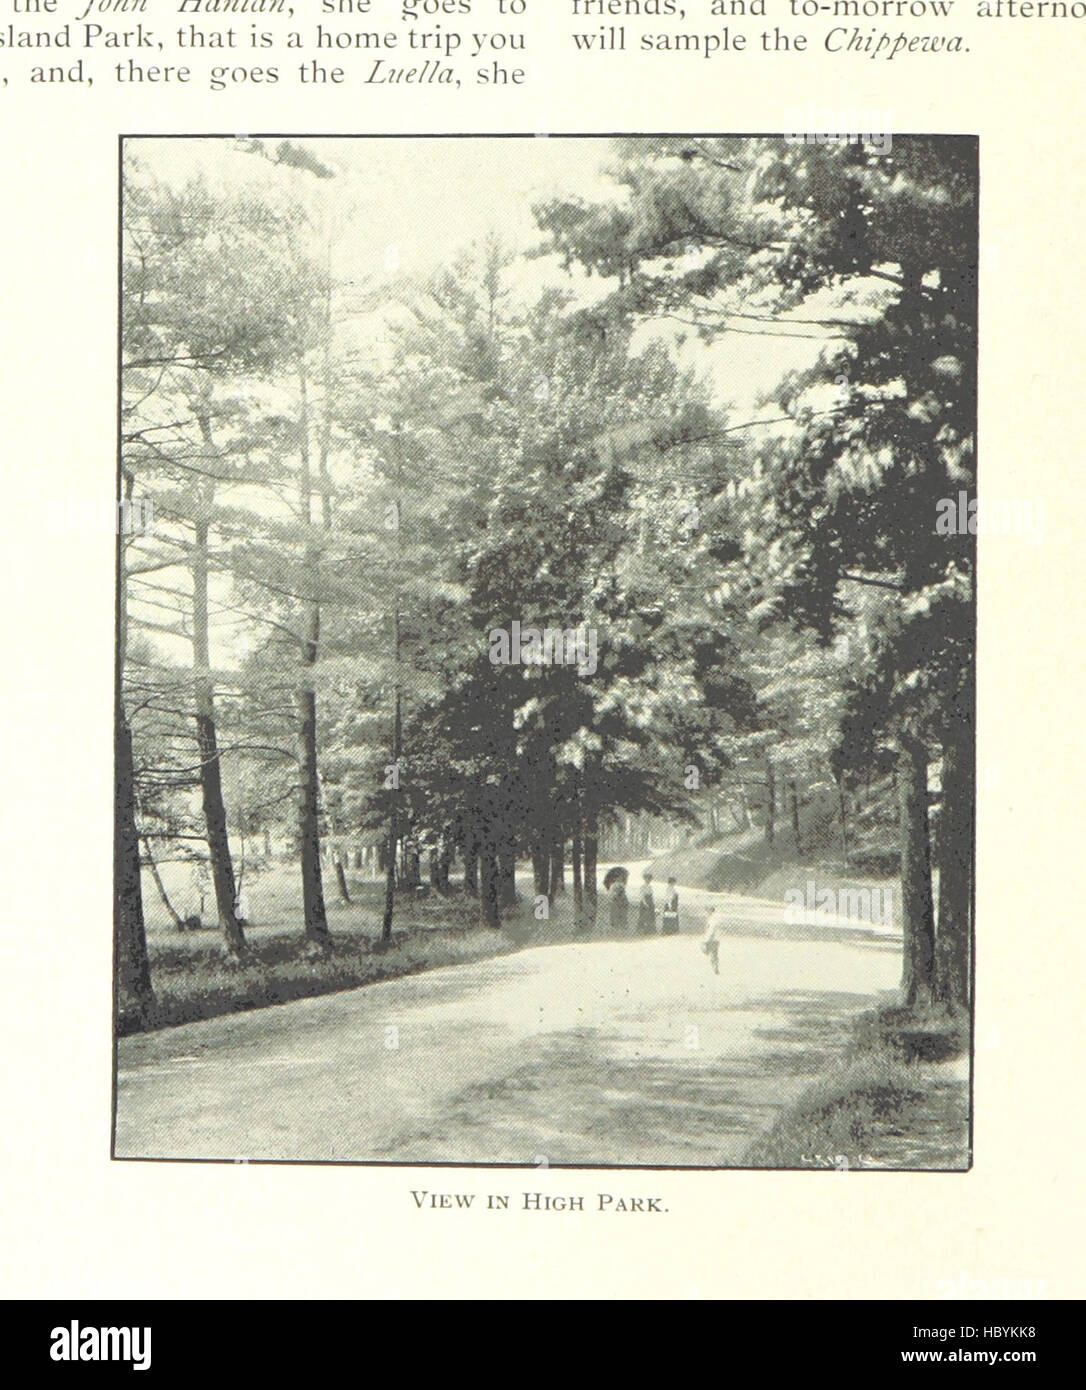 Image taken from page 48 of 'Wheel Outings in Canada and C. W. A. Guide. Published under the auspices of the Touring Section of the Canadian Wheelmen's Association. Edited by P. E. Doolittle' Image taken from page 48 of 'Wheel Outings in Canada Stock Photo